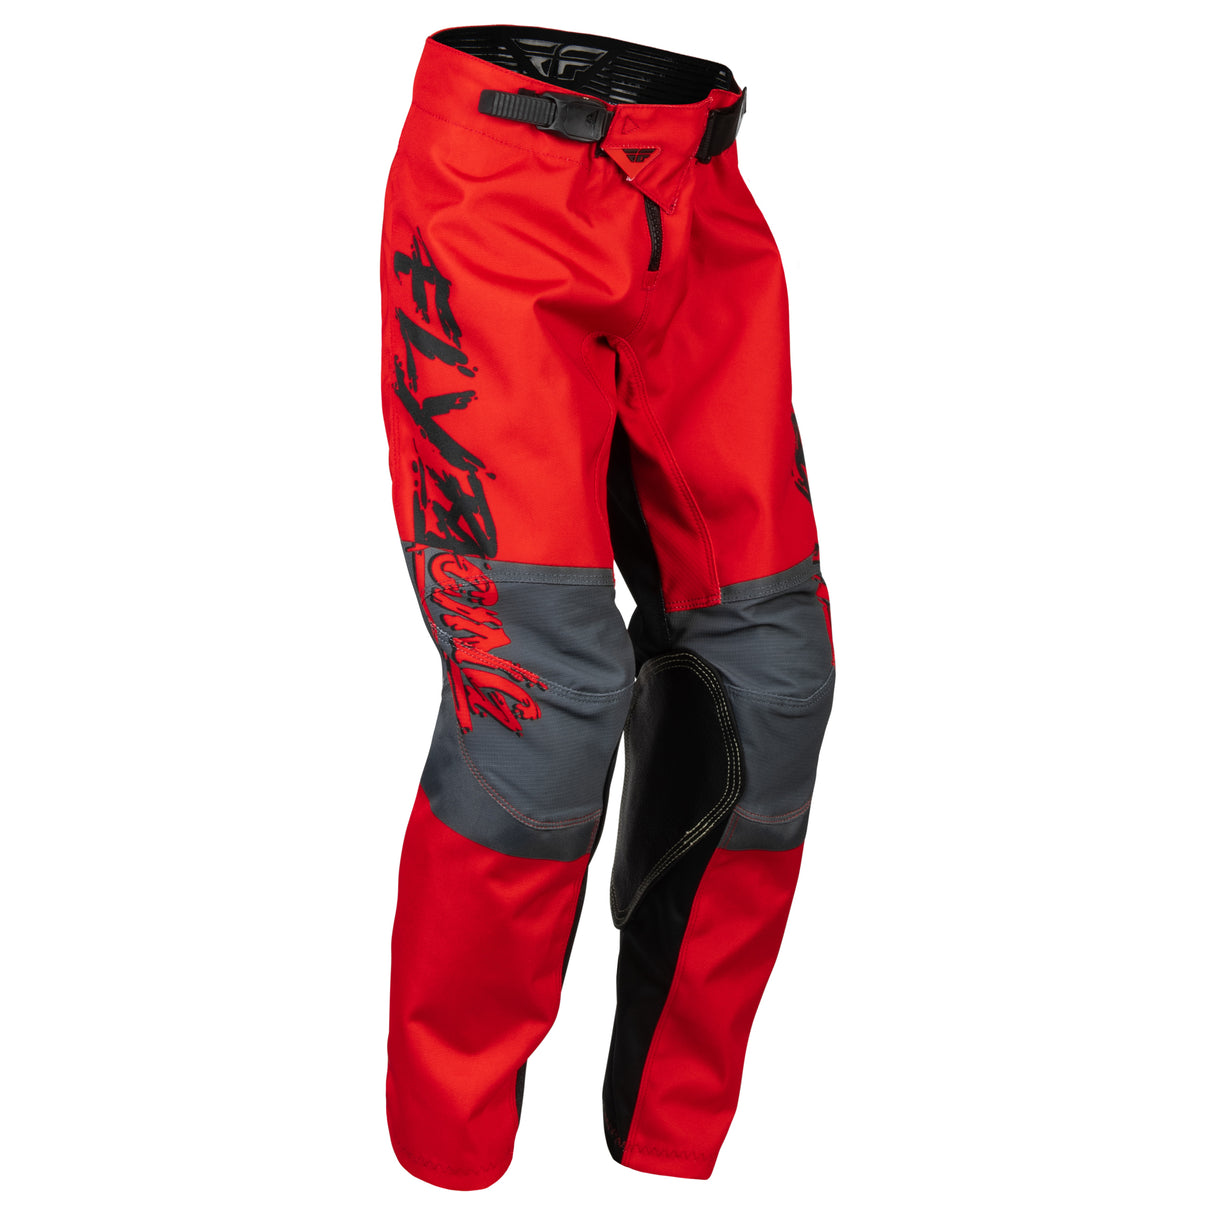 FLY 2023 YOUTH KINETIC KHAOS PANTS BLACK/RED/ GREY